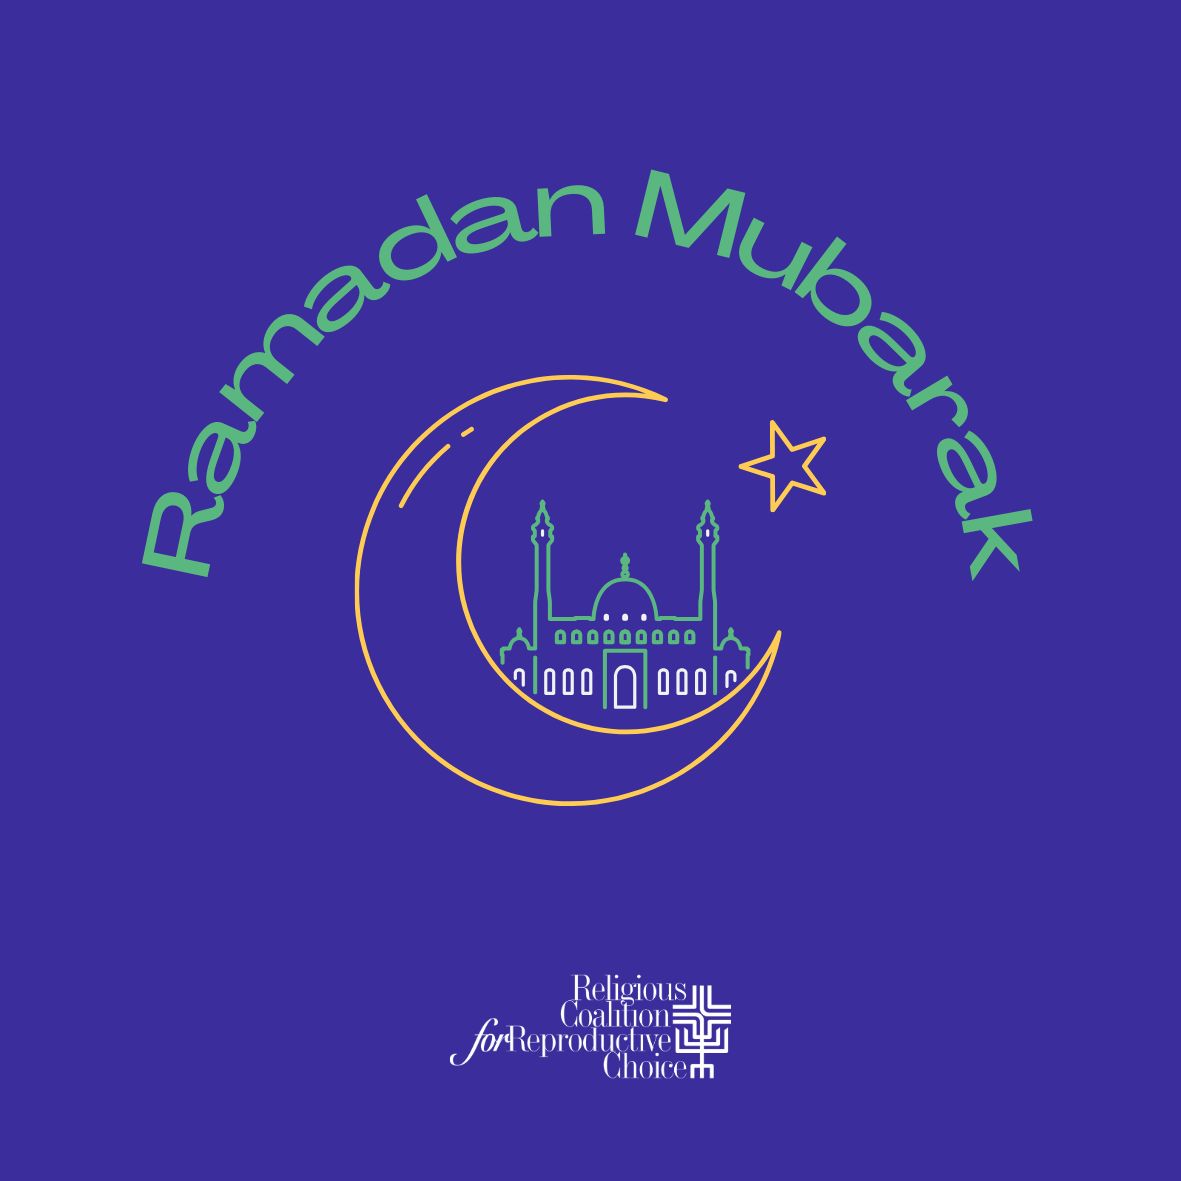 To all those observing on this holy day, may you embrace the spirit of reflection and renewal as Ramadan begins. 🌙 We wish you a blessed month filled with peace, joy, and spiritual growth. #RamadanMubarak